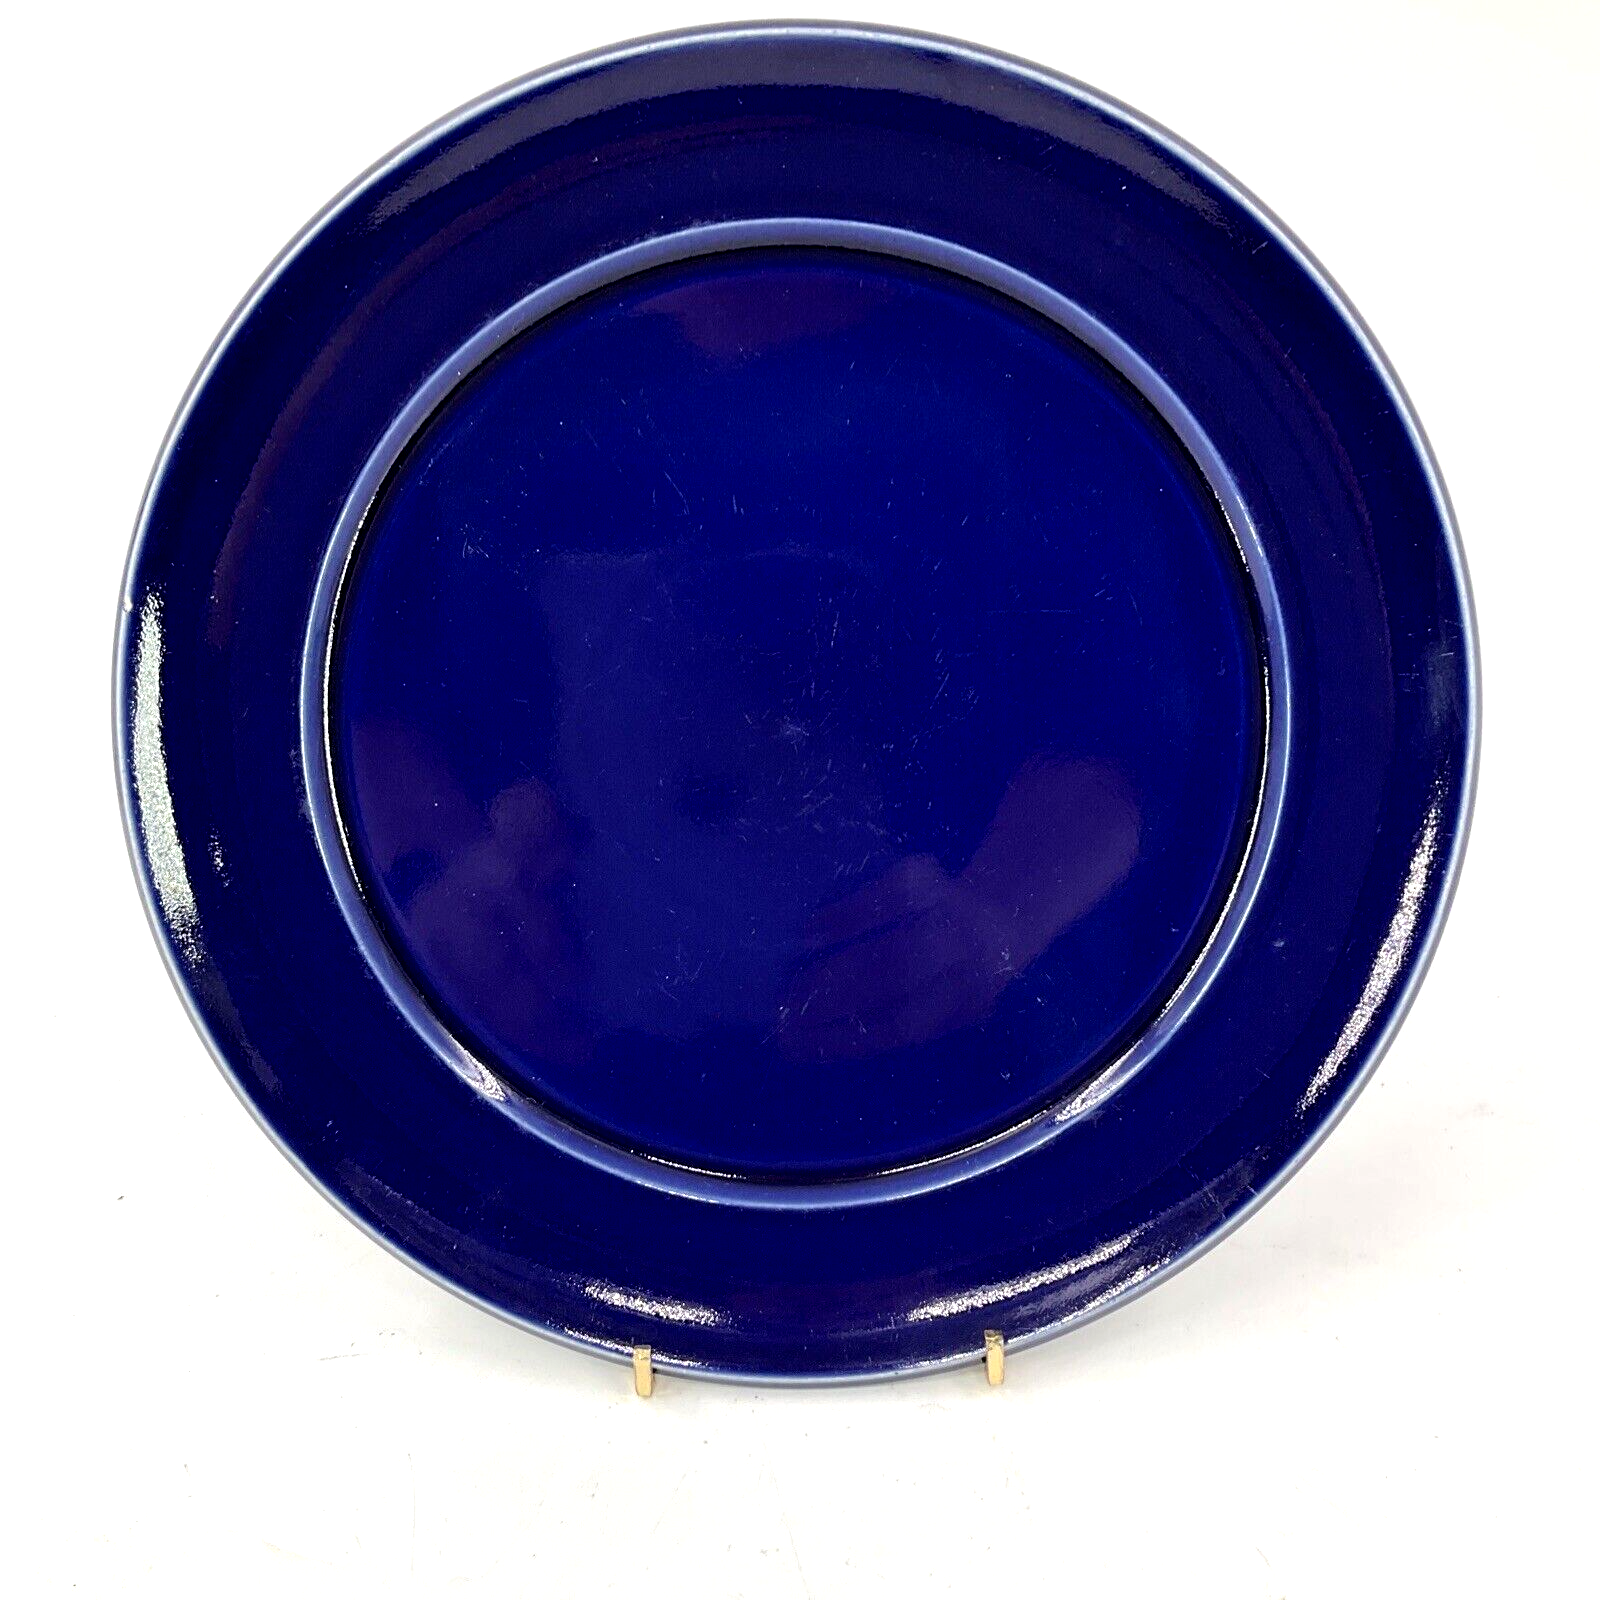 DENBY POTPOURRI BLUE Dinner Plate 9 7/8" Made in England Single Replacement - $18.40